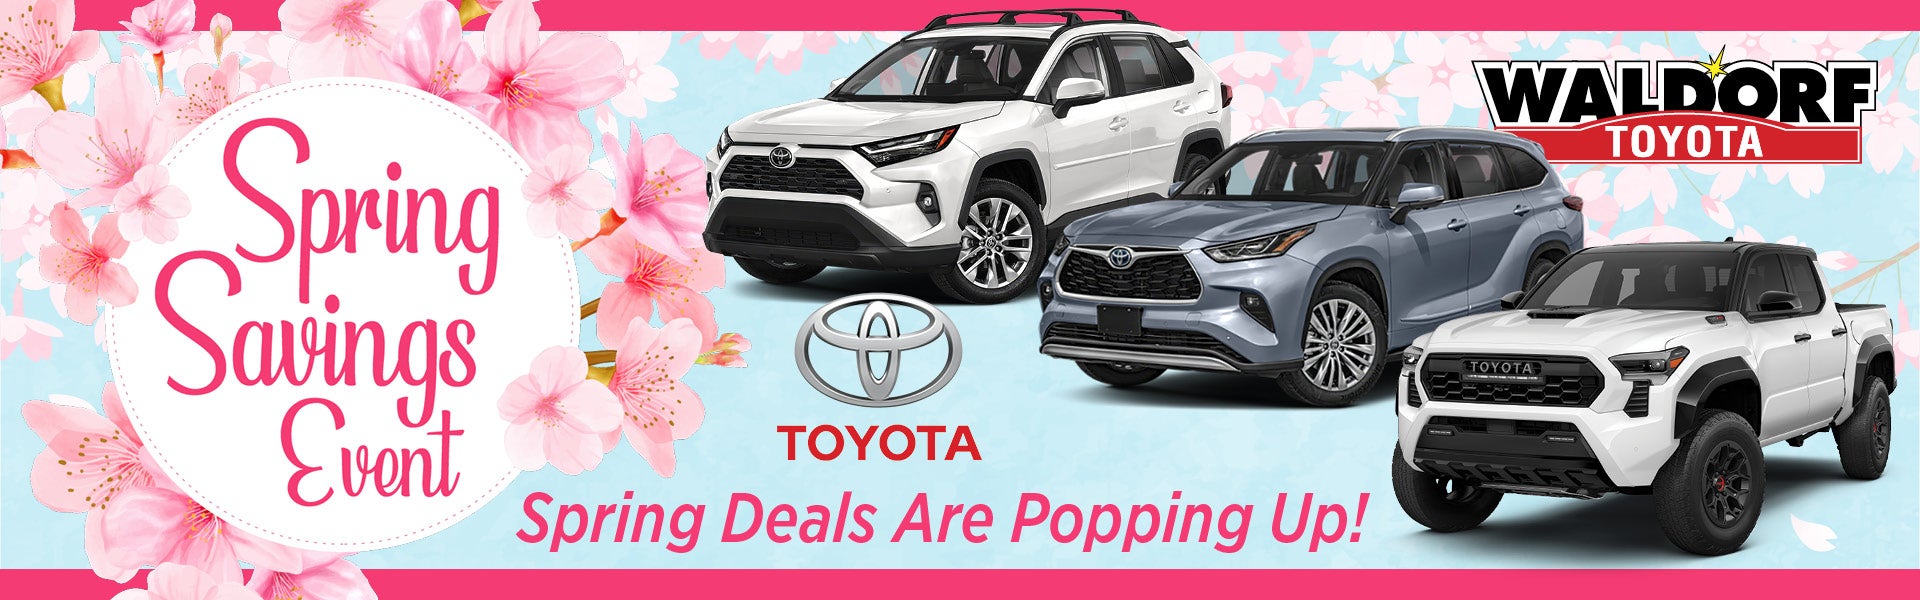 Spring Deals Are Popping Up!